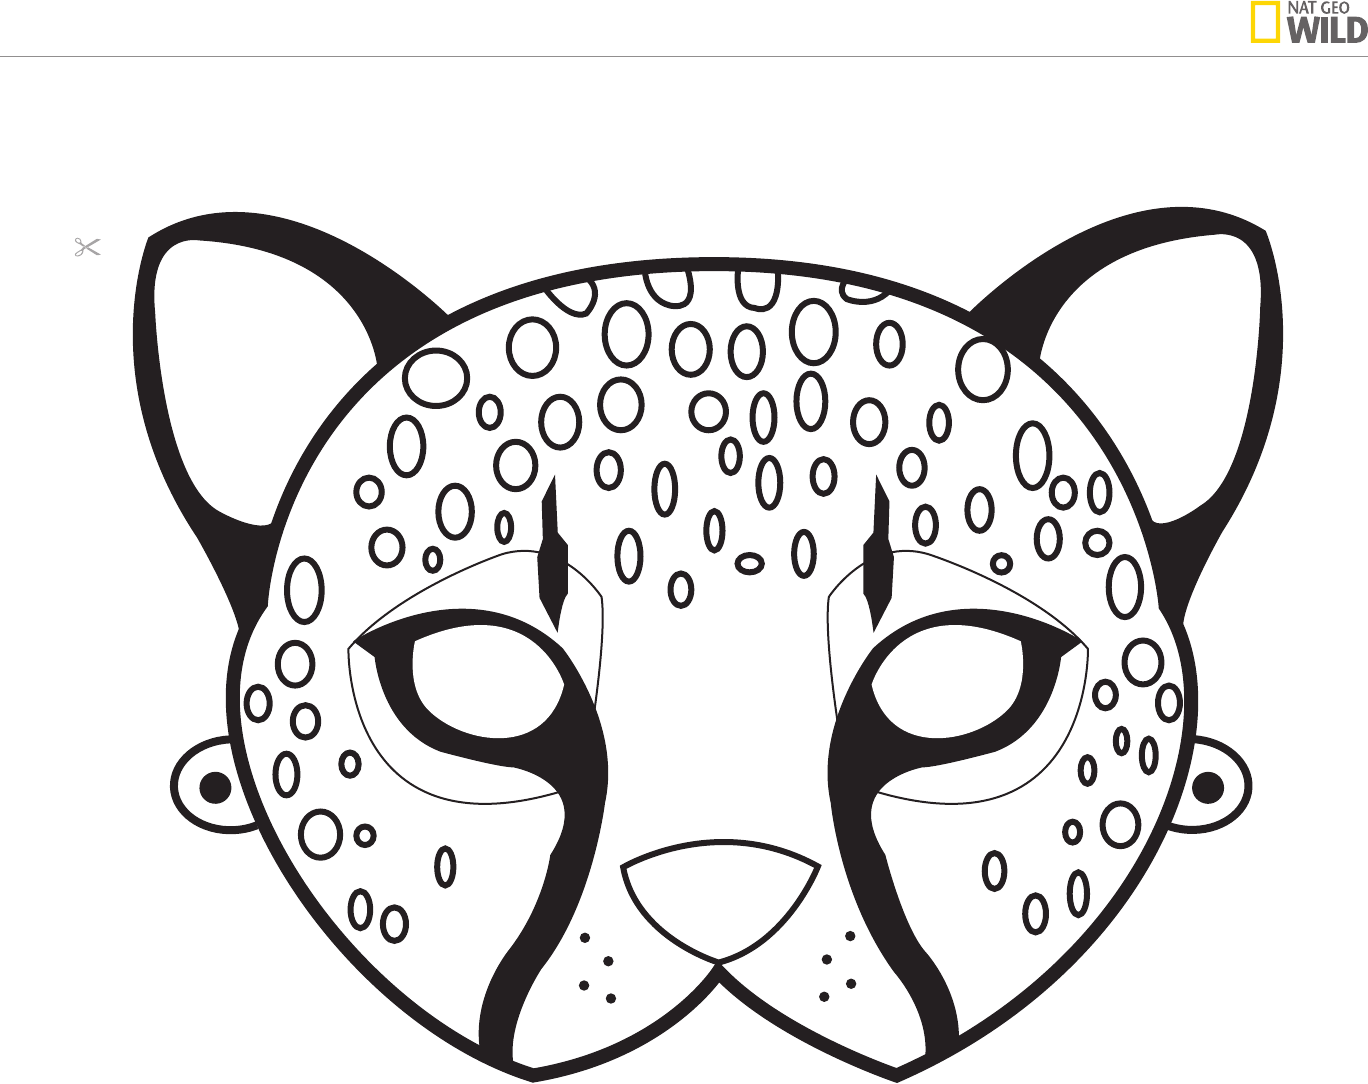 Cheetah clipart mask, Cheetah mask Transparent FREE for download on ...